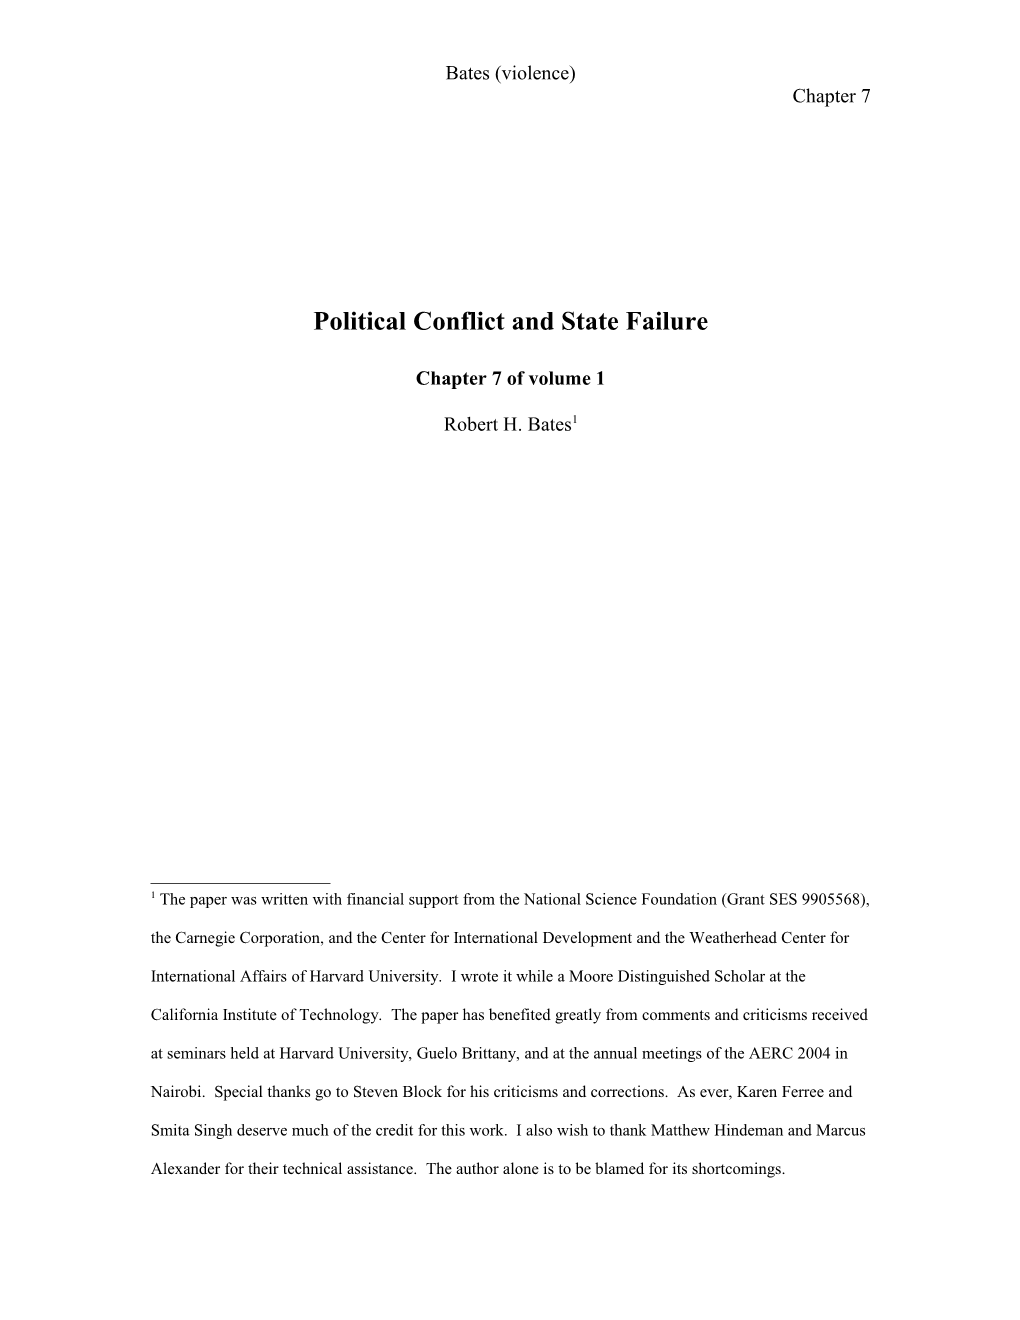 Political Conflict and State Failure